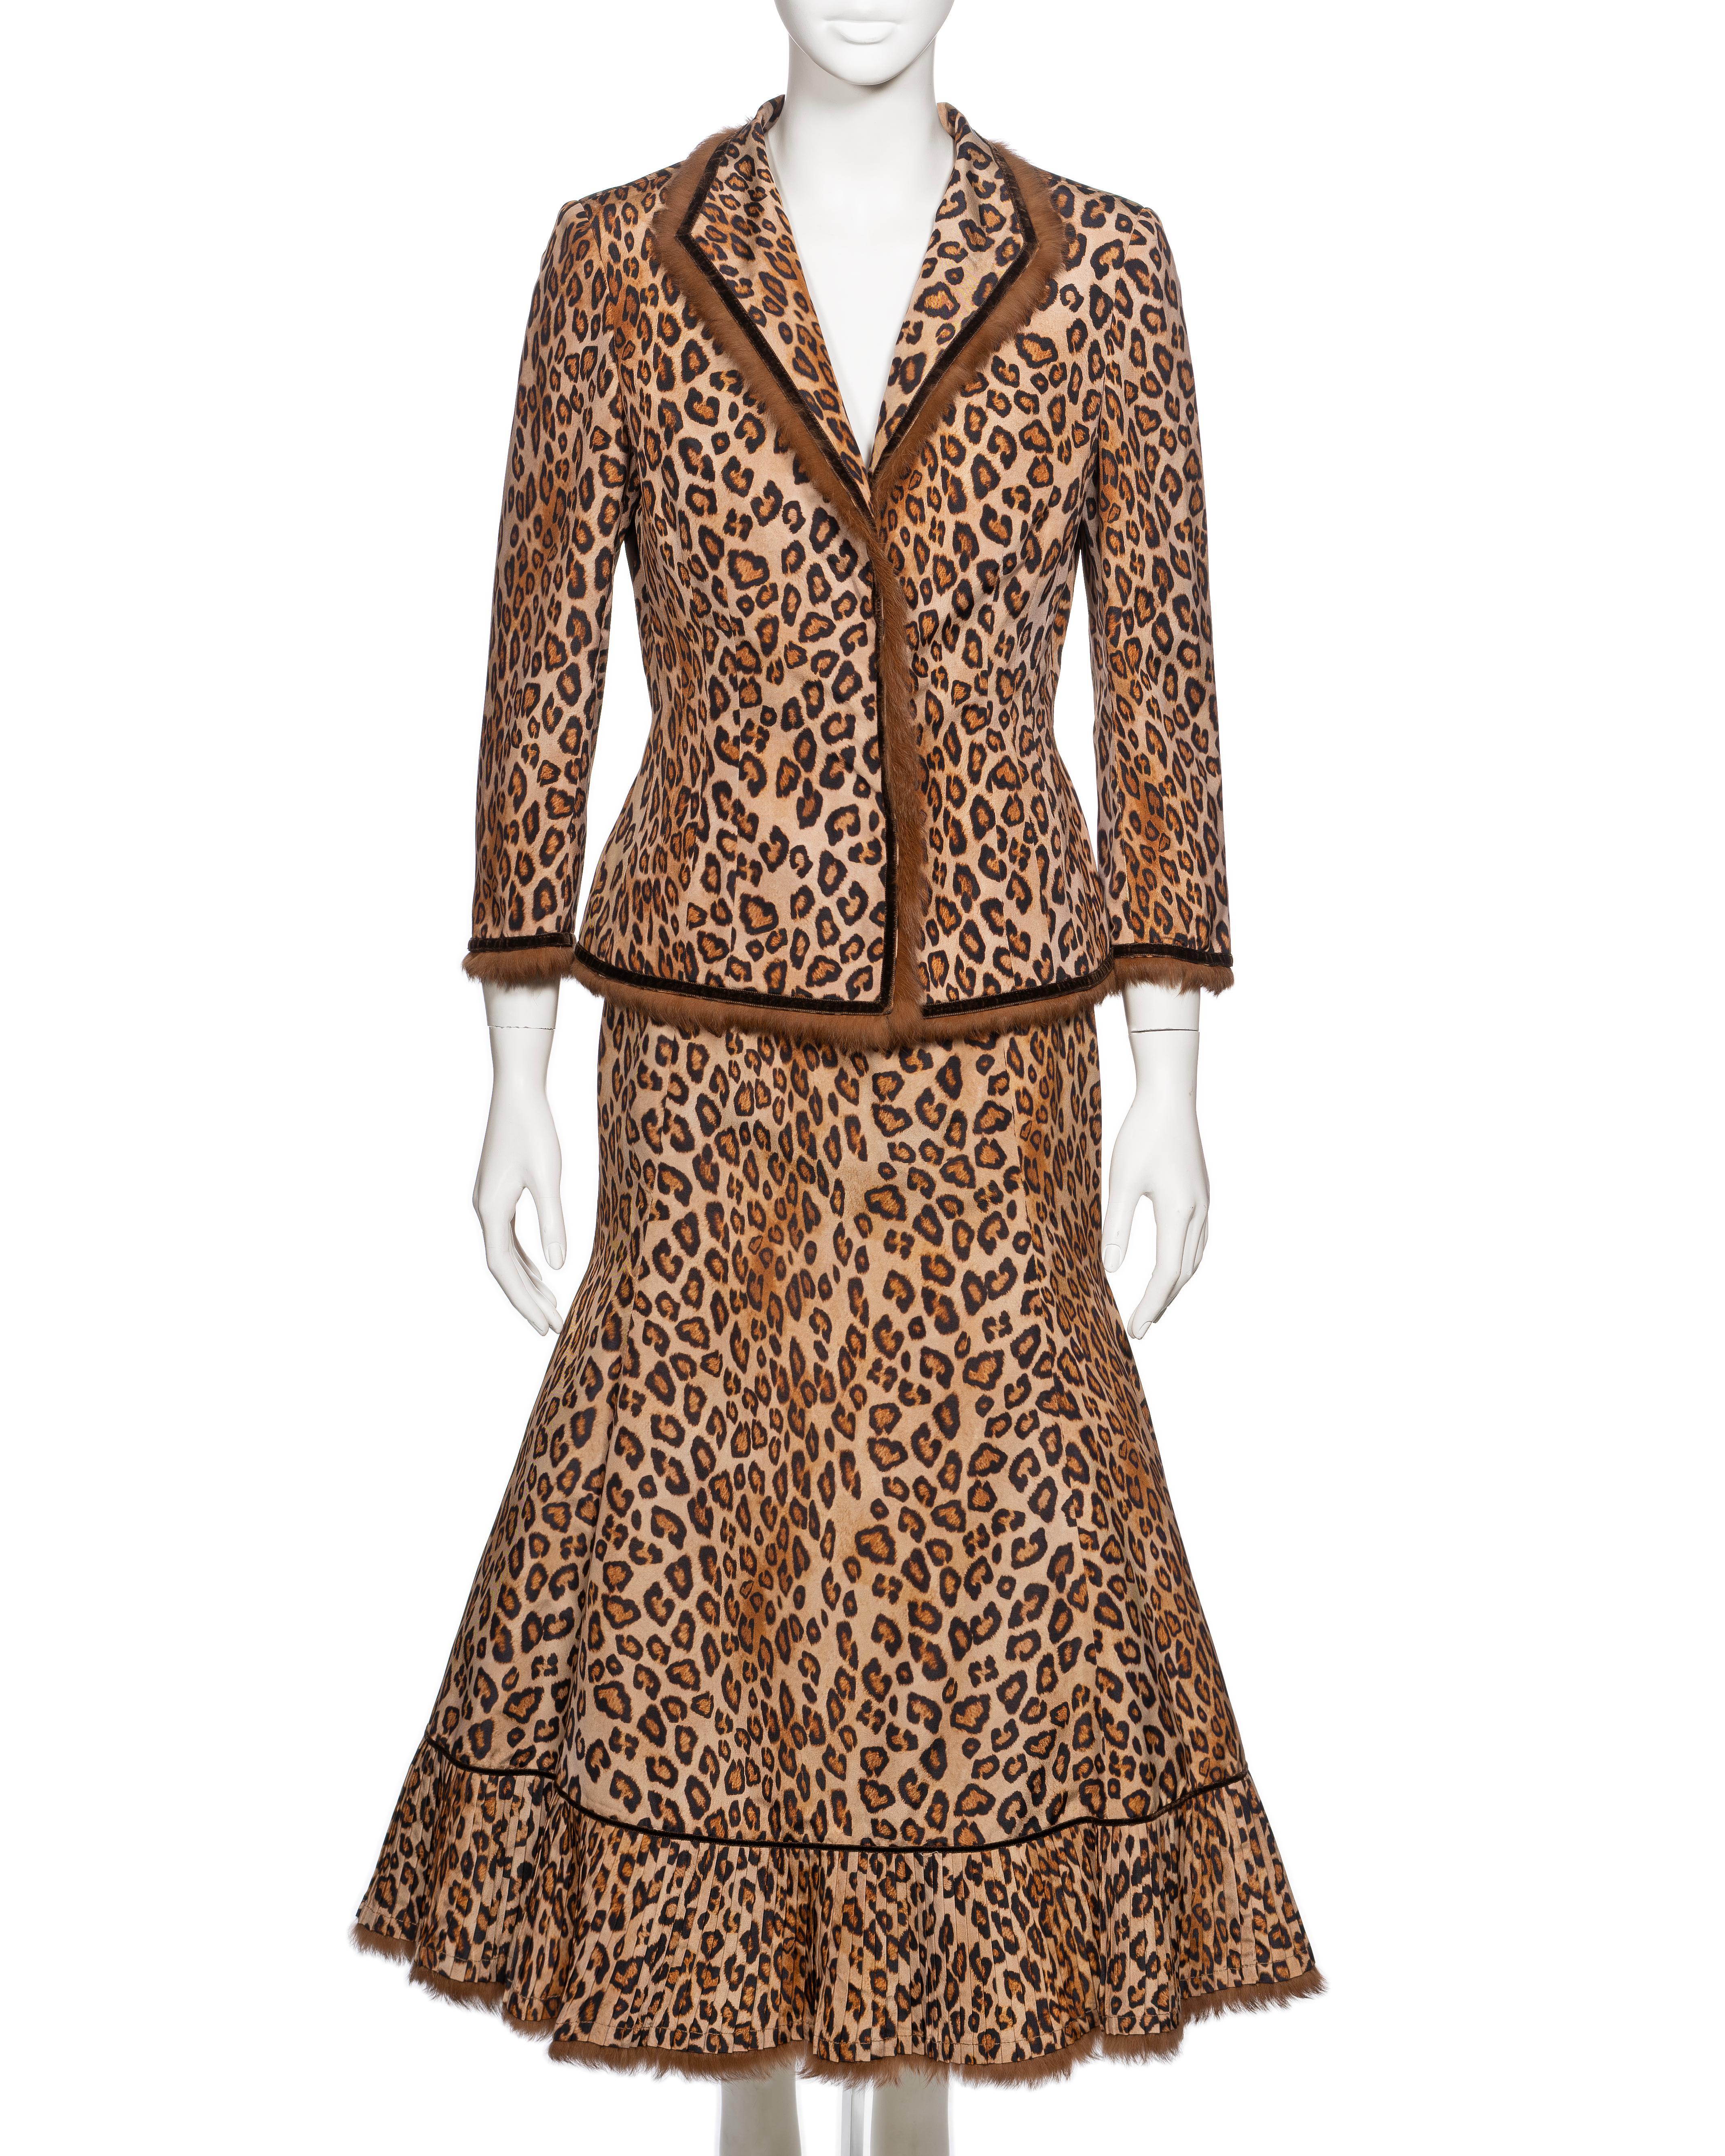 Alexander McQueen Leopard Print Silk and Fur Jacket and Skirt Suit, FW 2005 In Excellent Condition For Sale In London, GB